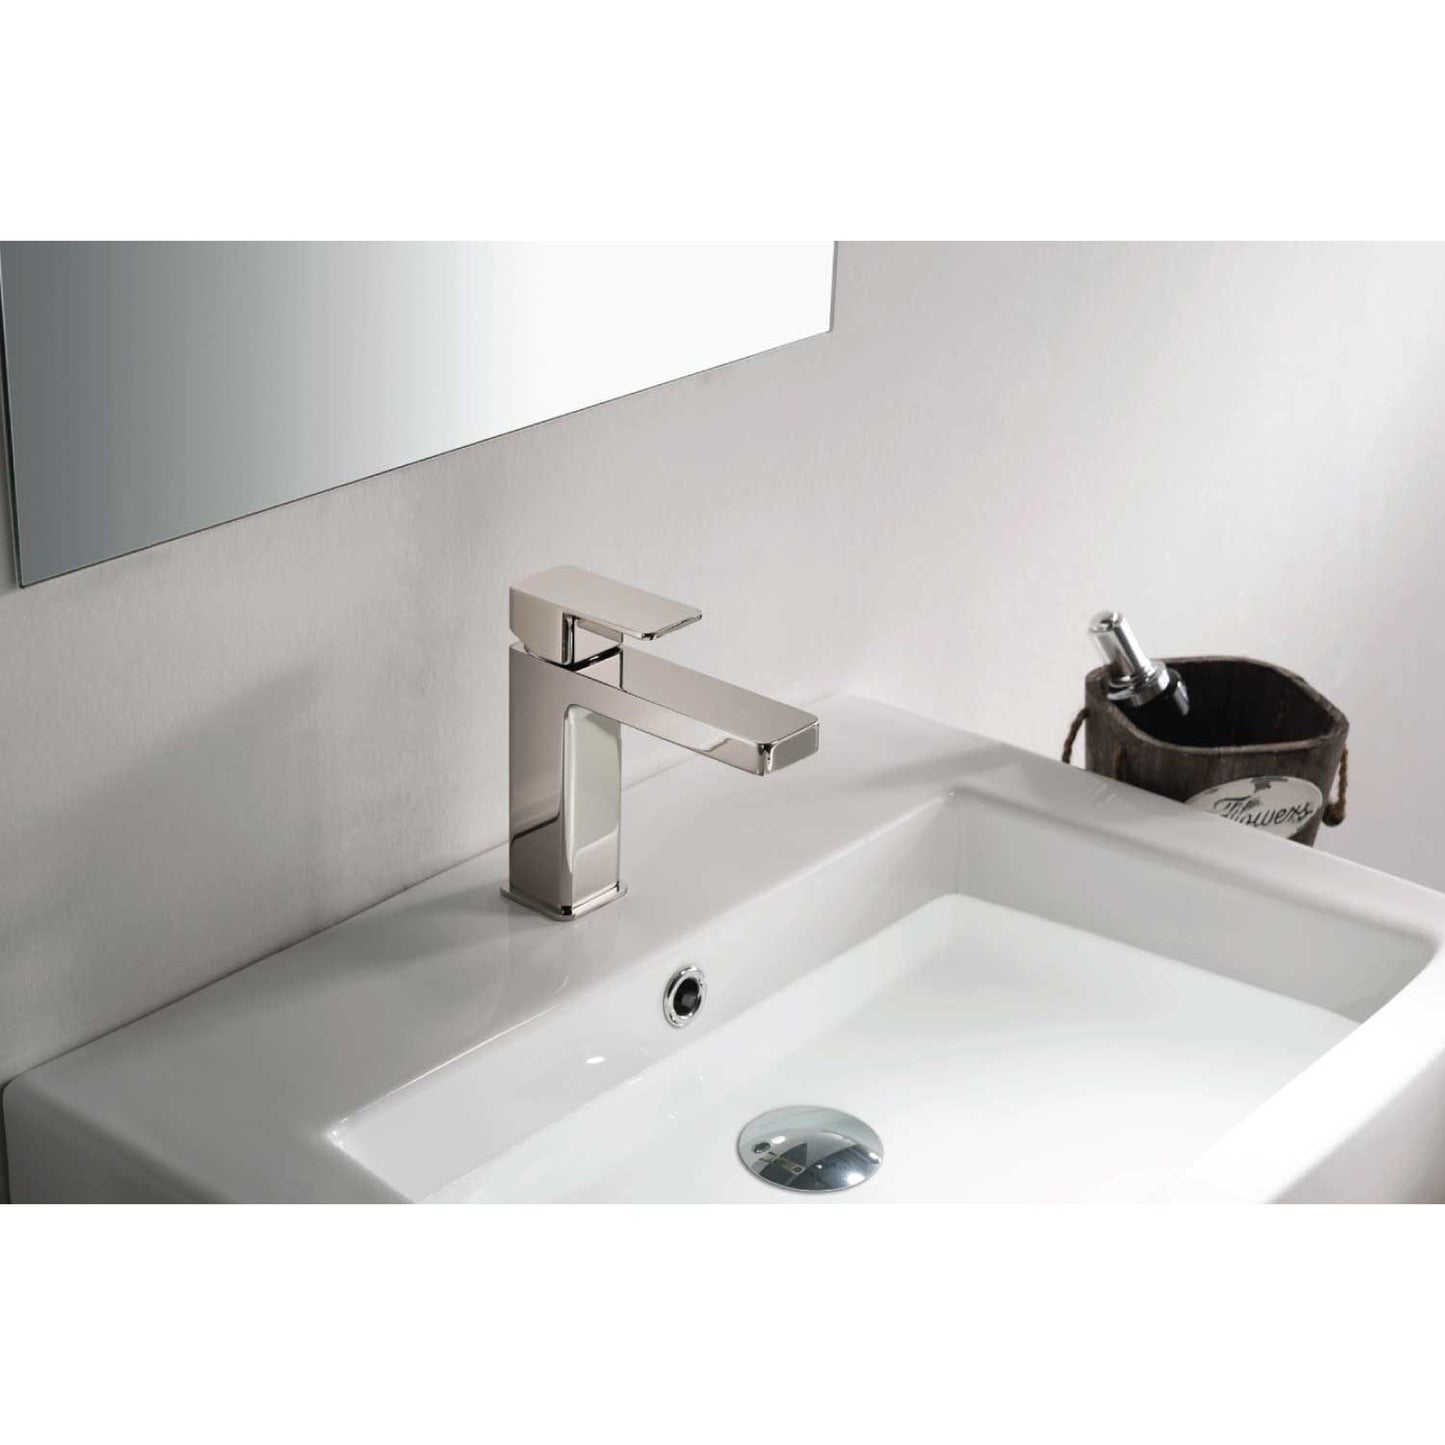 Isenberg Serie 196 7" Single-Hole Brushed Nickel PVD Deck-Mounted Bathroom Sink Faucet With Pop-Up Drain and Adjustable Hot Limit Safety Stop